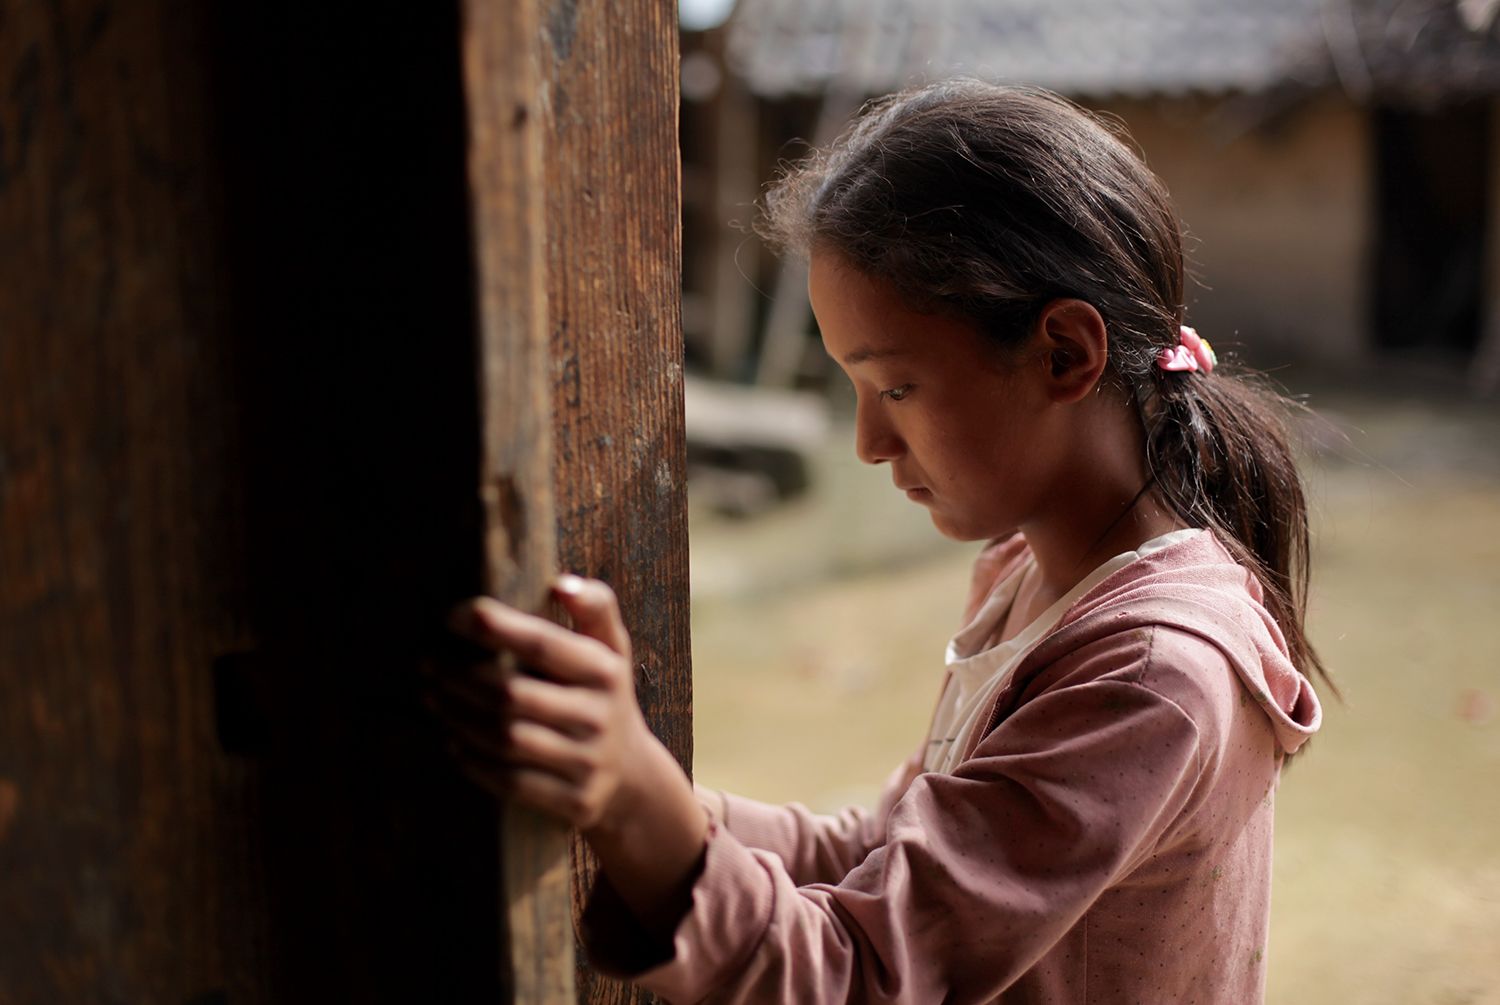 Wang Bing stands by the door of her family’s farmhouse in Liangshan, July 2016. Image by Max Duncan.